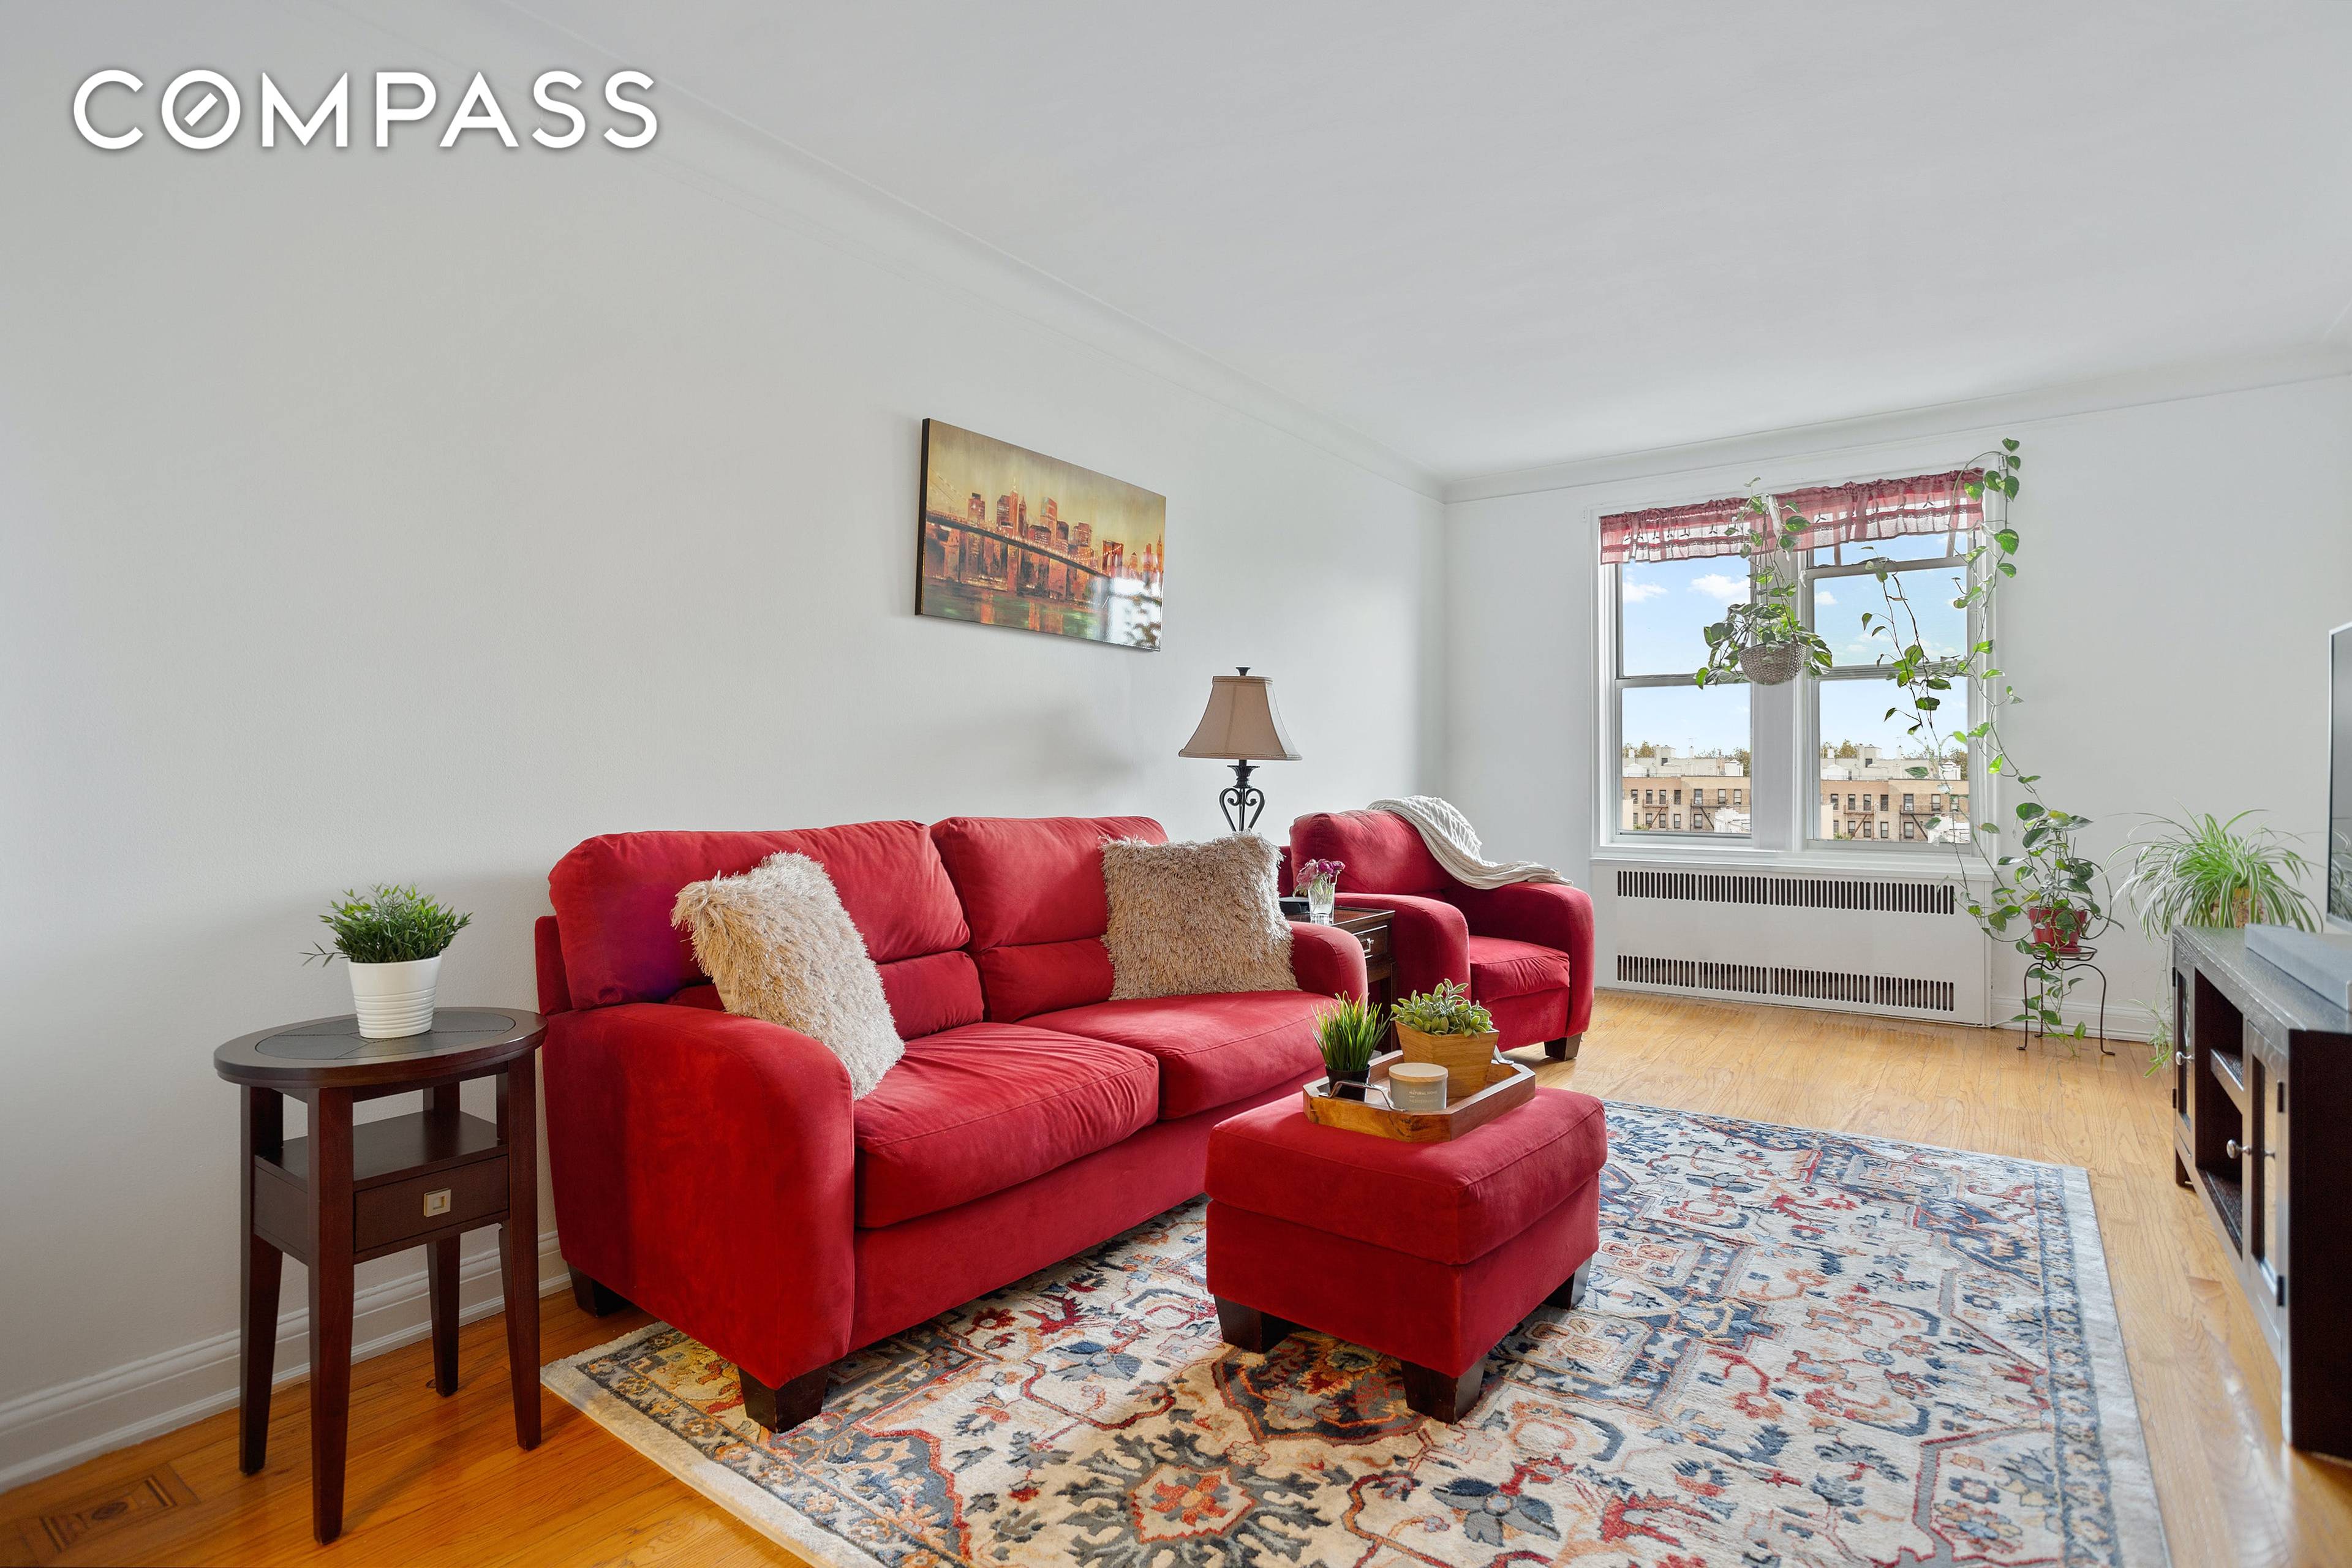 Welcome home to this extra large one Bedroom apartment filled with natural light and beautiful views of the Verrazano Bridge.